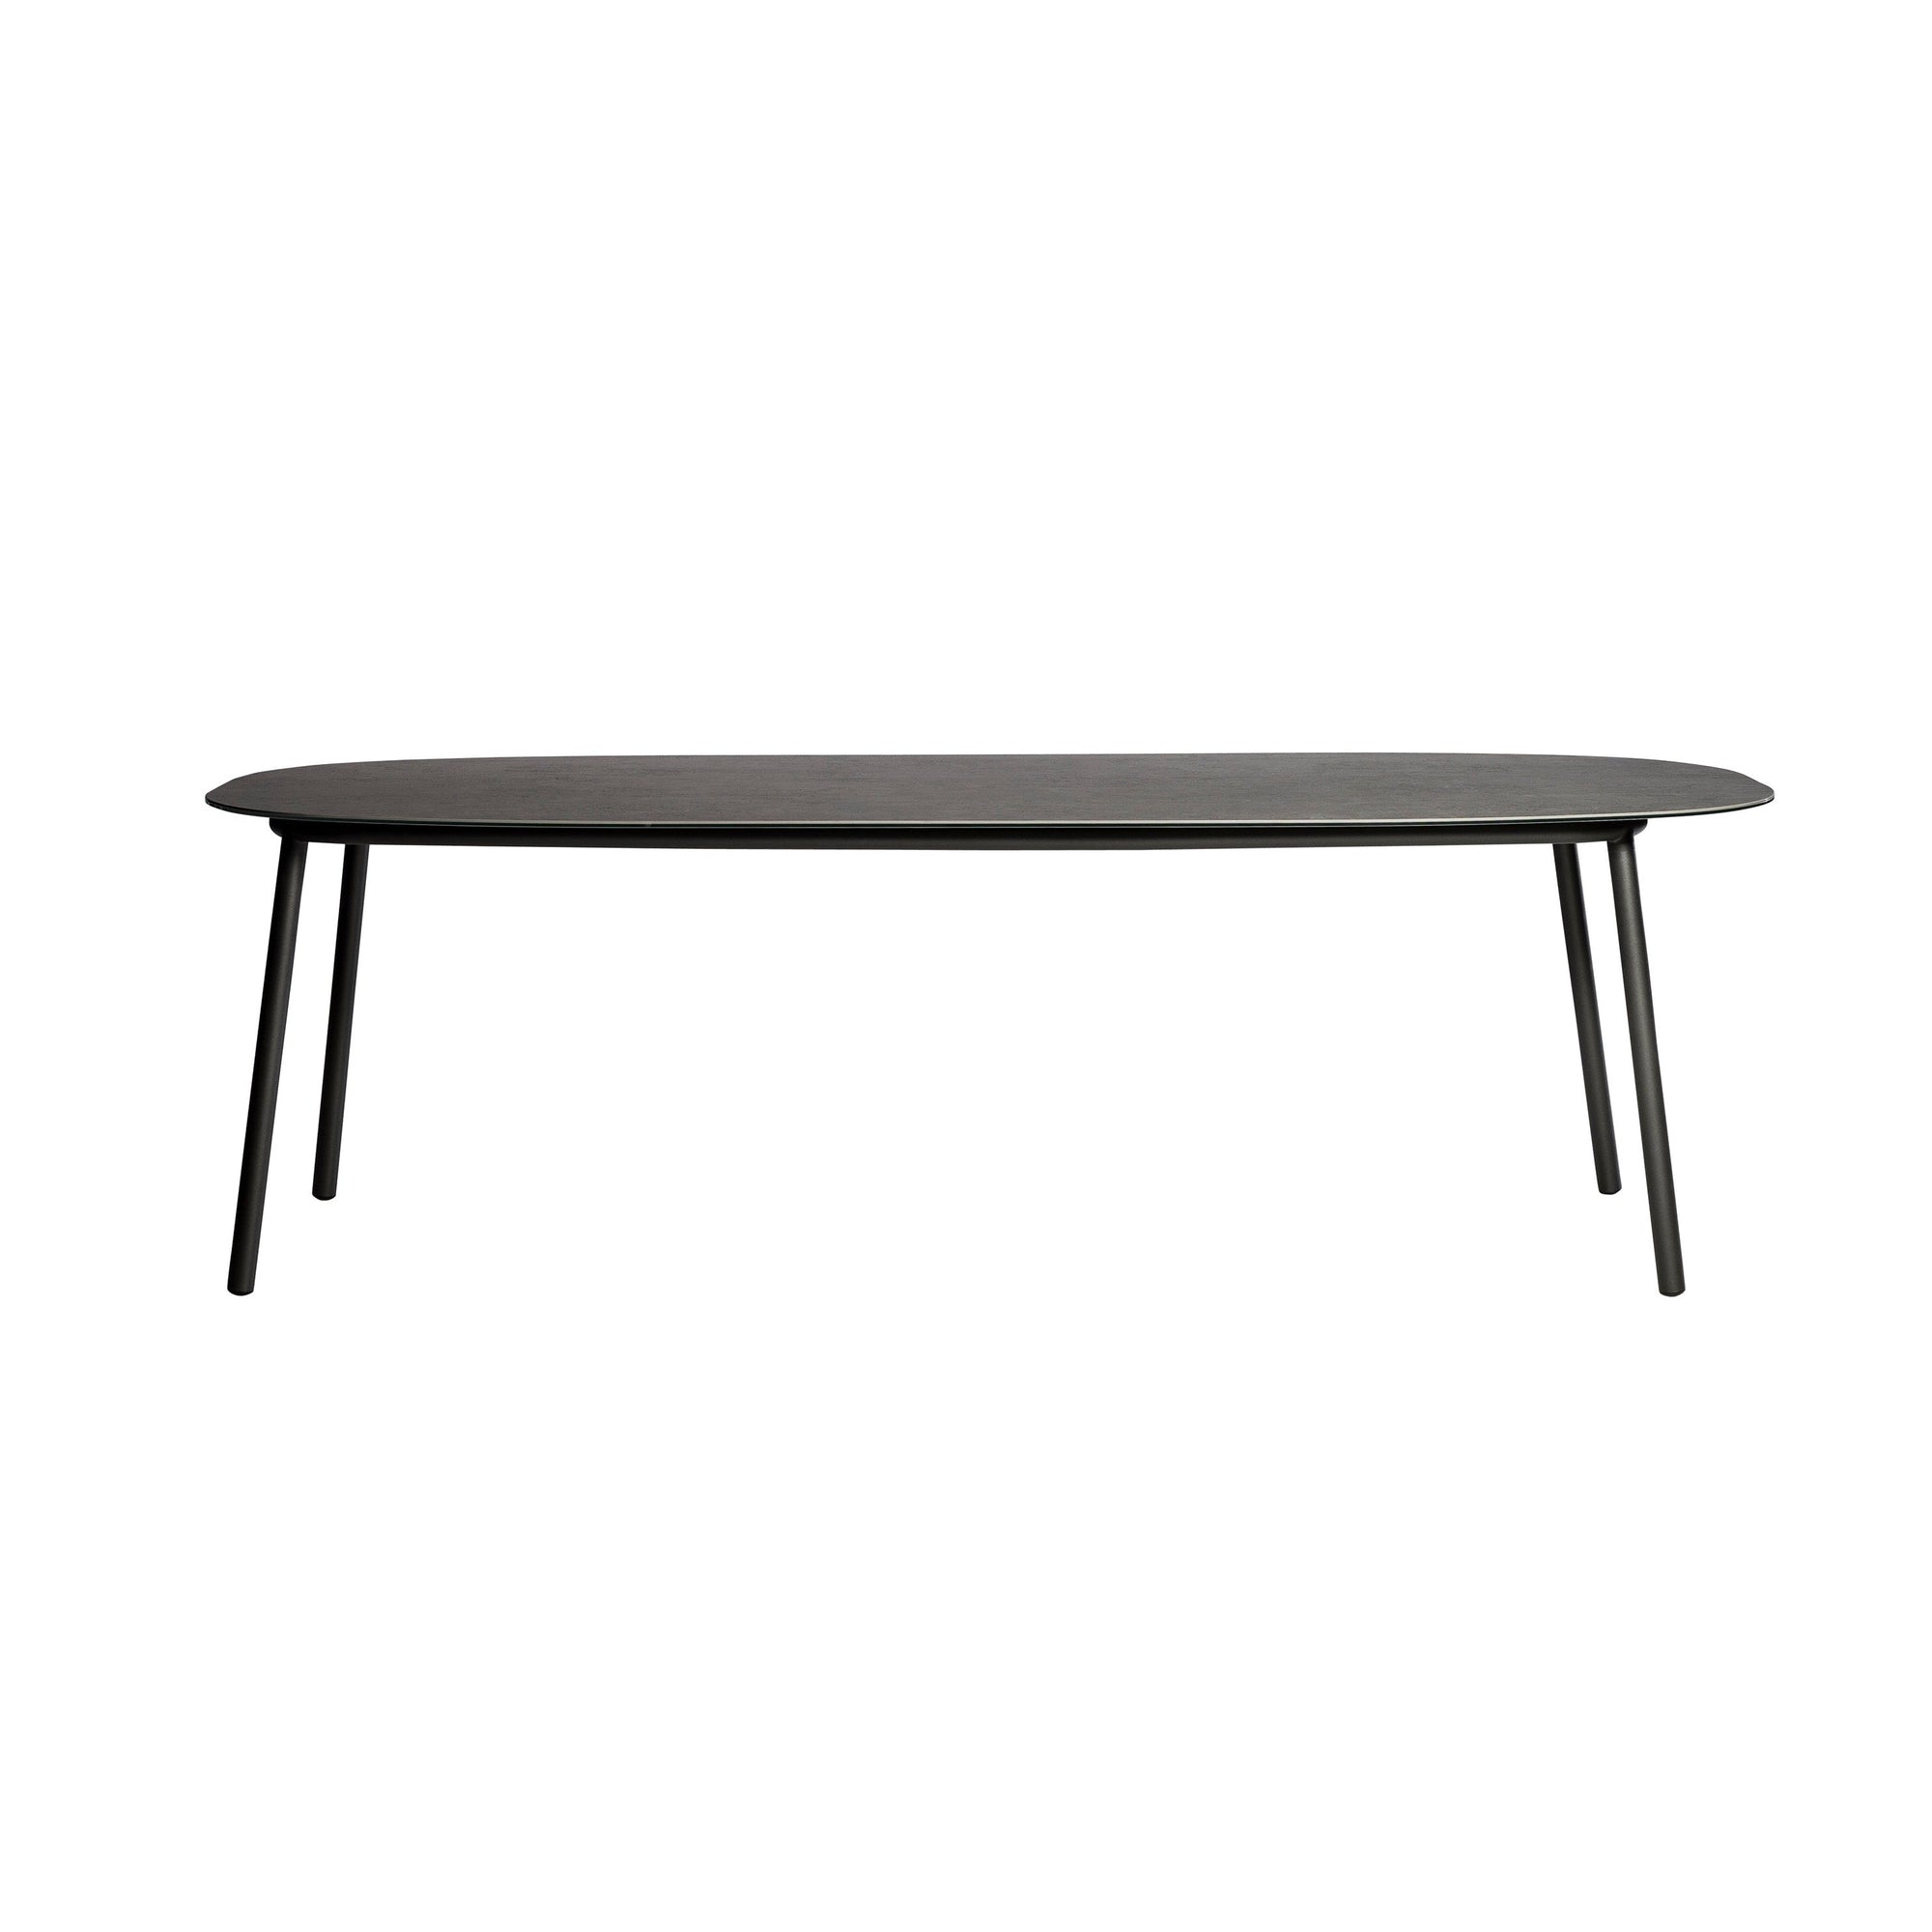 Tribù TOSCA low oval dining table 298 cm